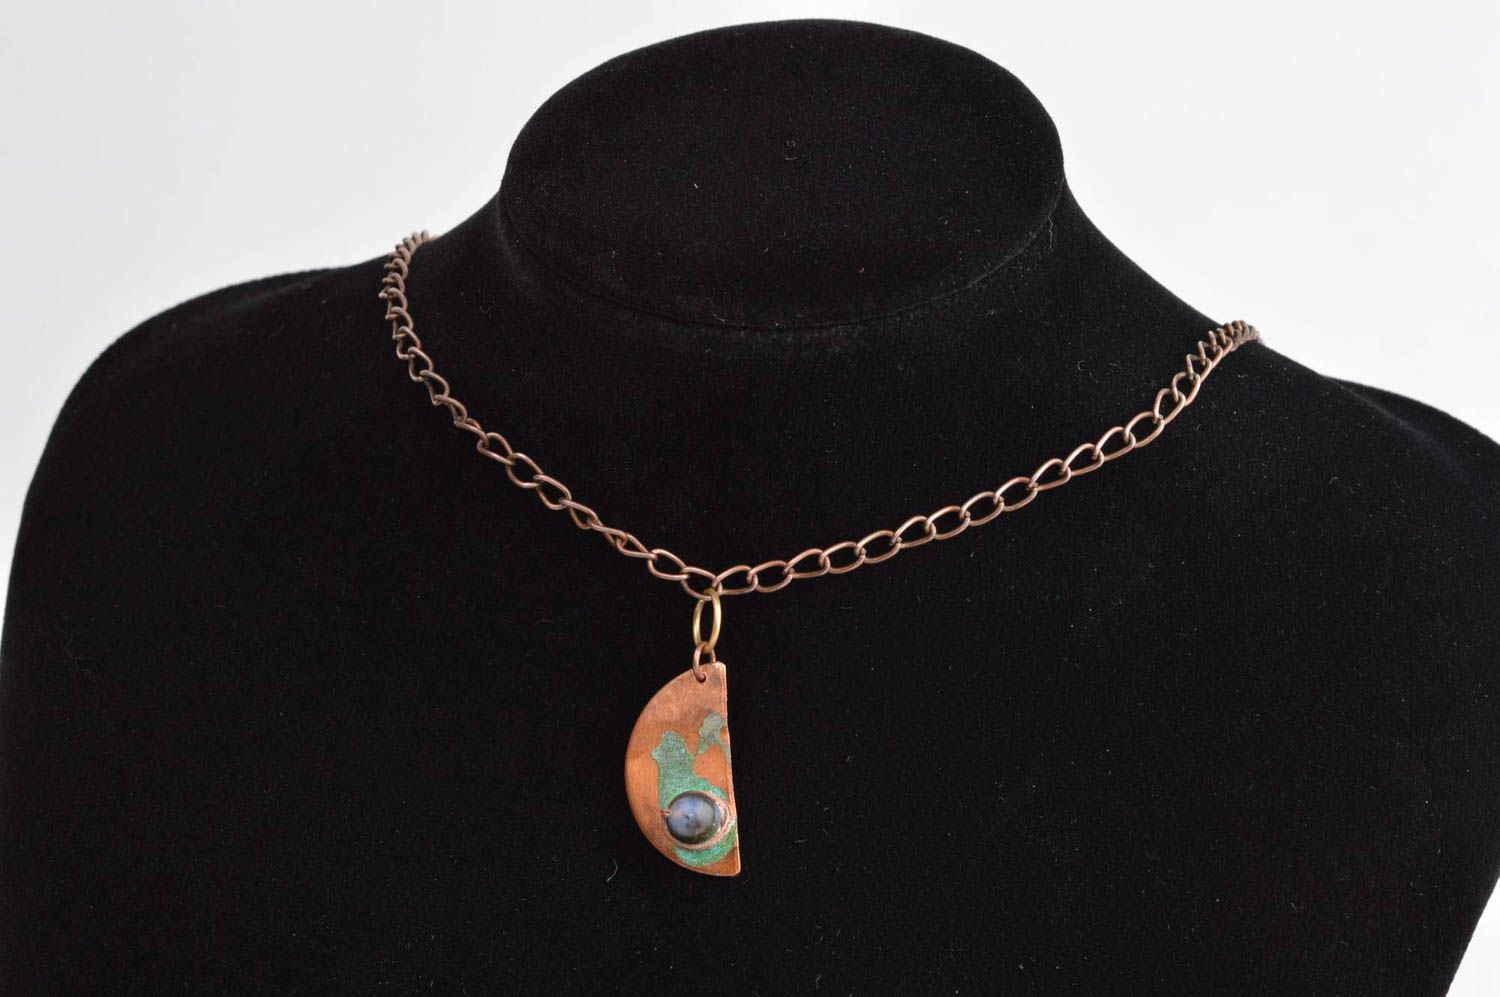 Copper neck accessory jewelry with natural stones unusual accessory gift ideas photo 1